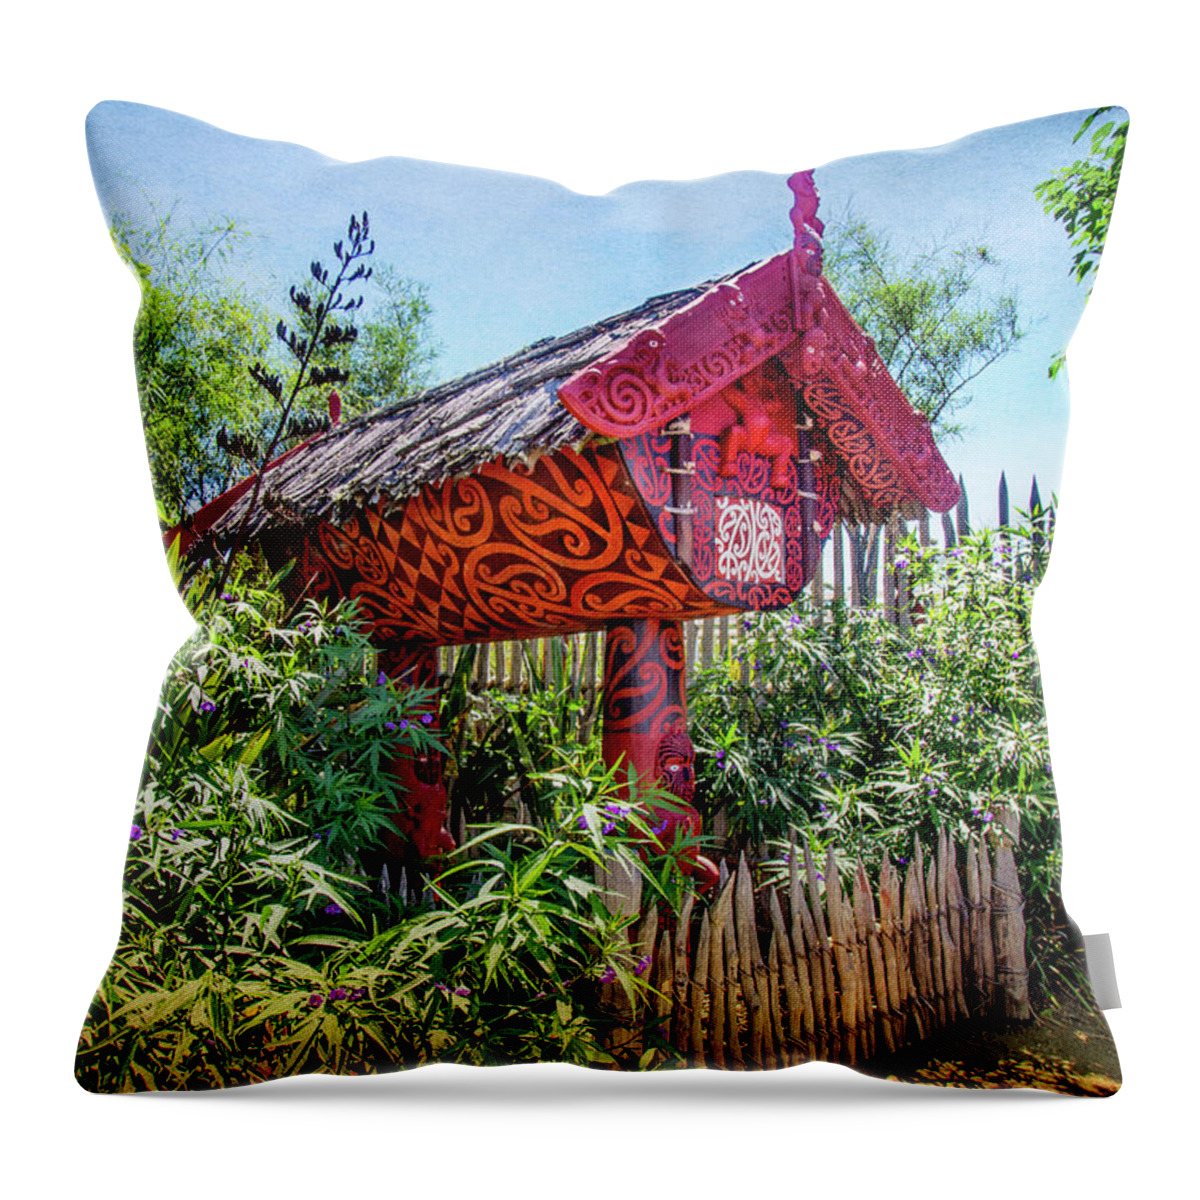 Maori Throw Pillow featuring the photograph Maori Home in New Zealand by Kathryn McBride